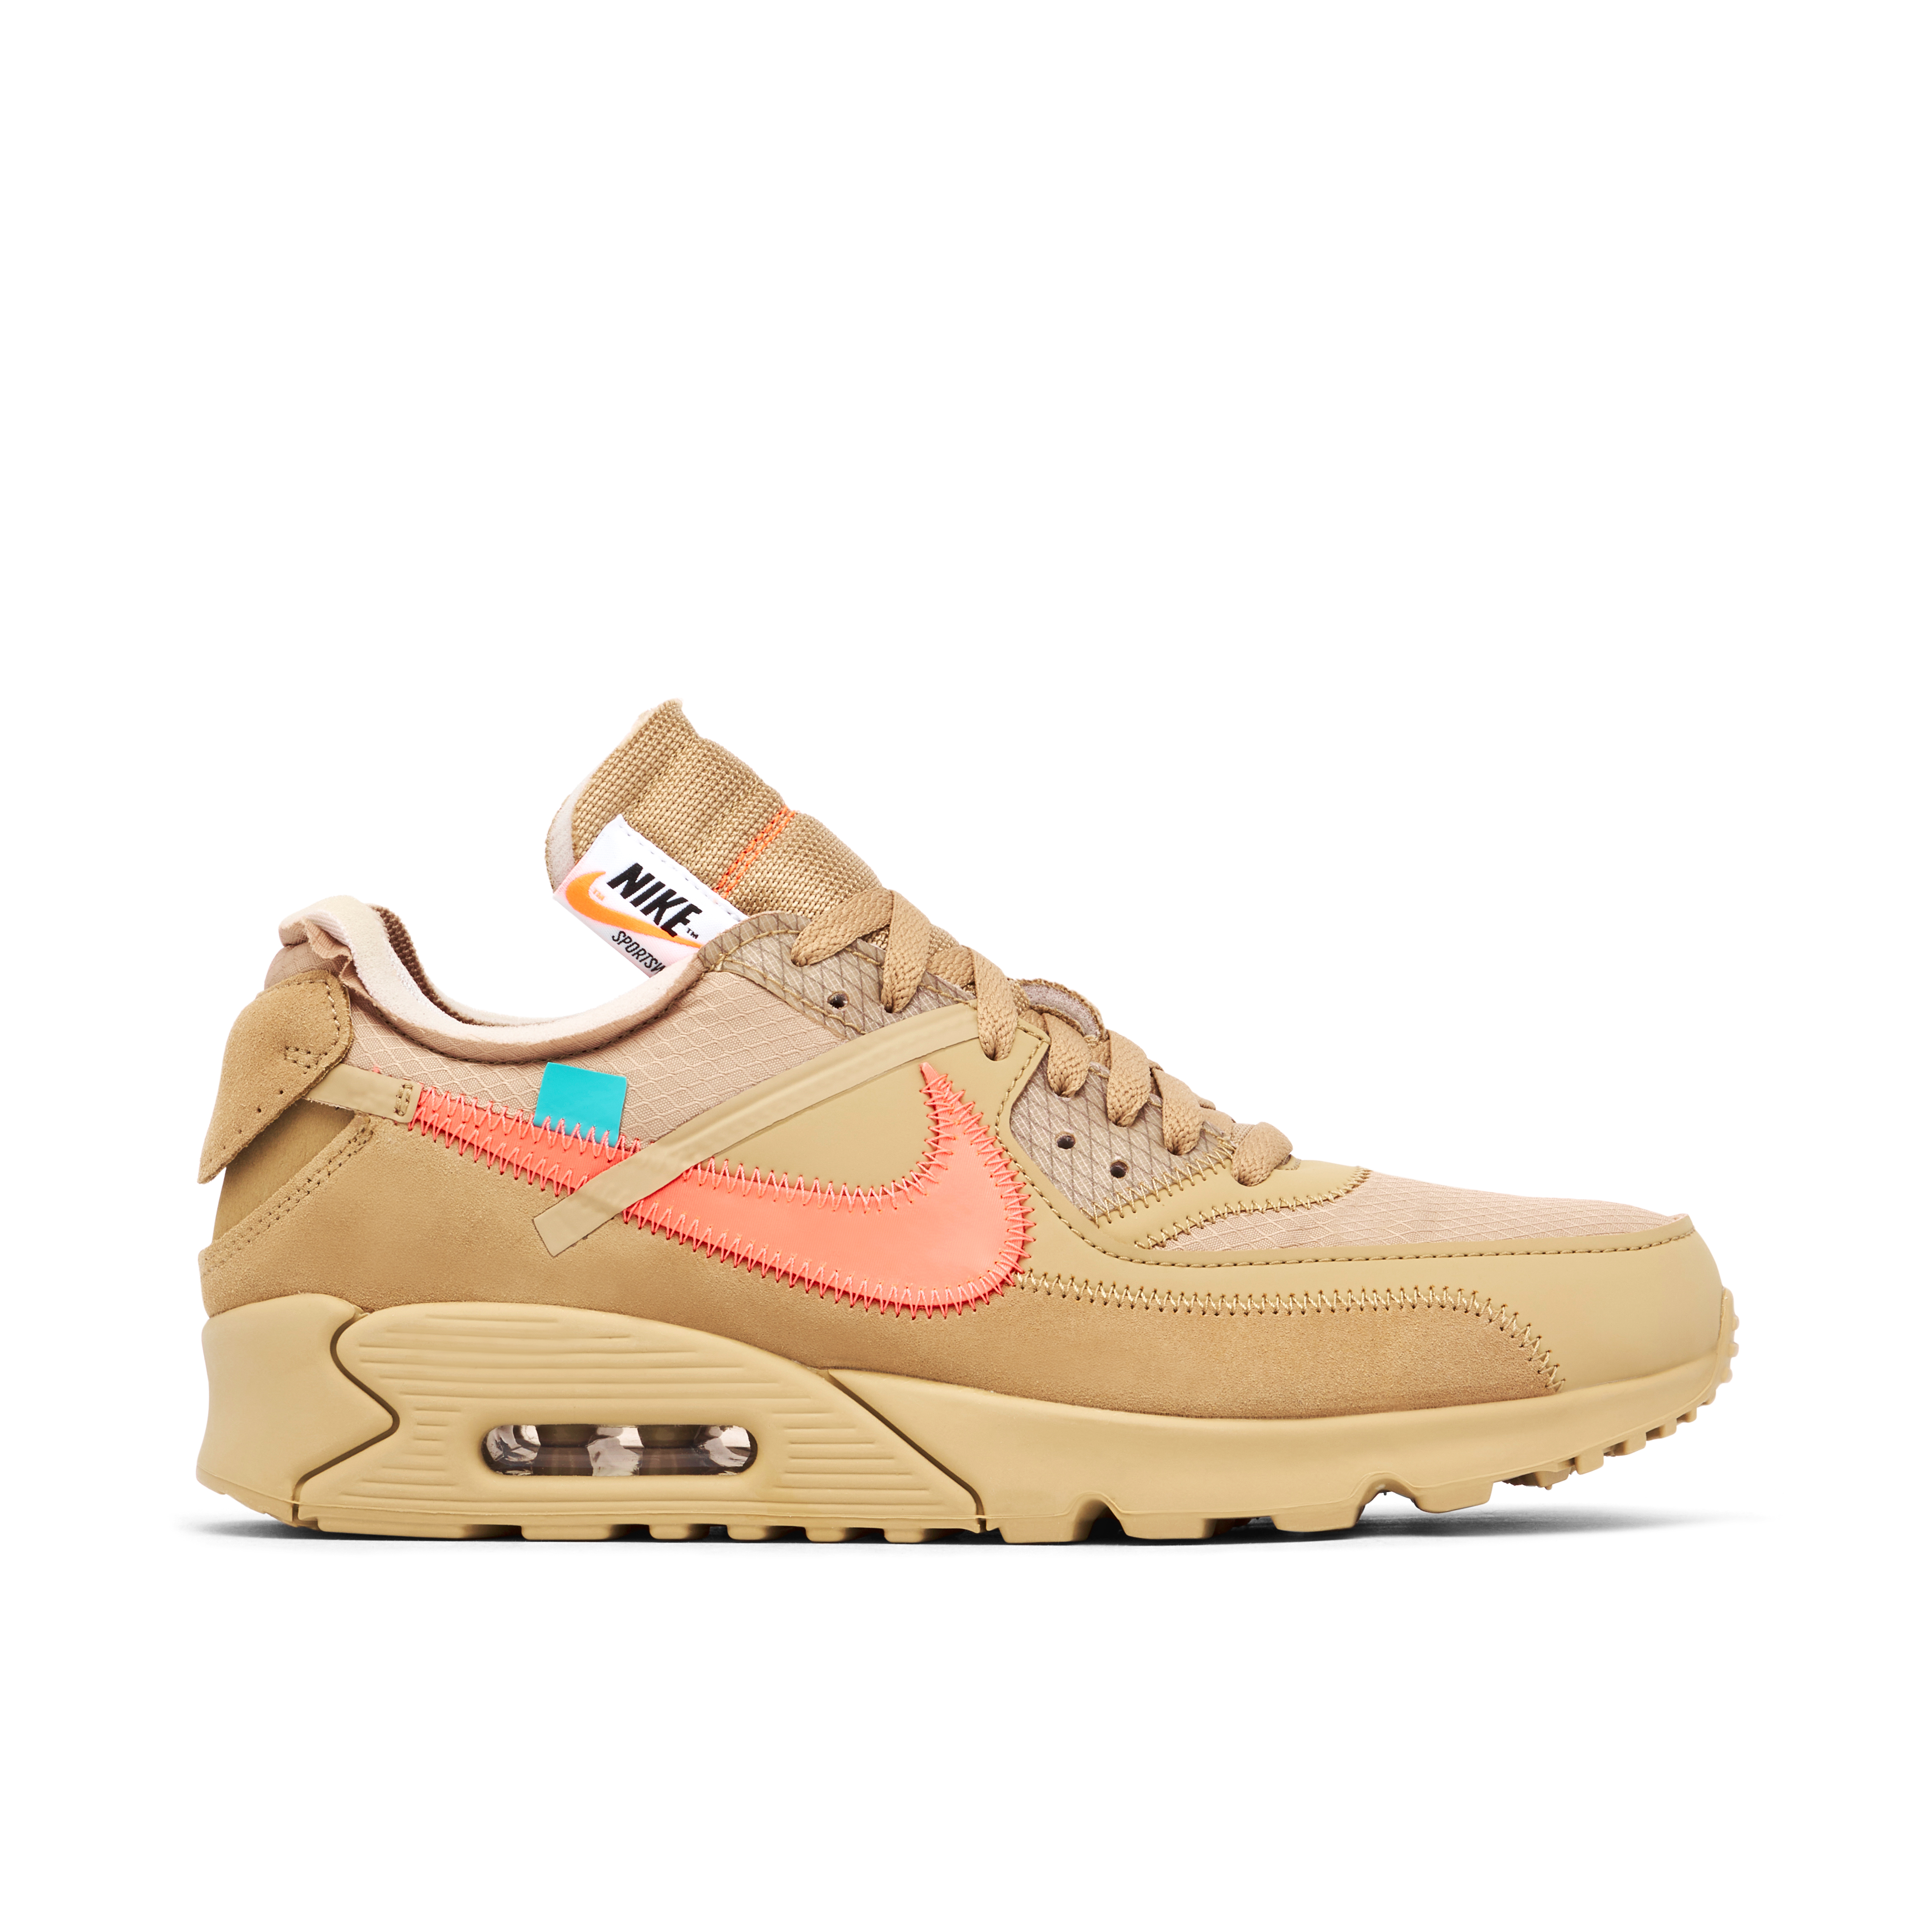 Off White Air Max 90 Desert Ore | AA7293-200 | Laced